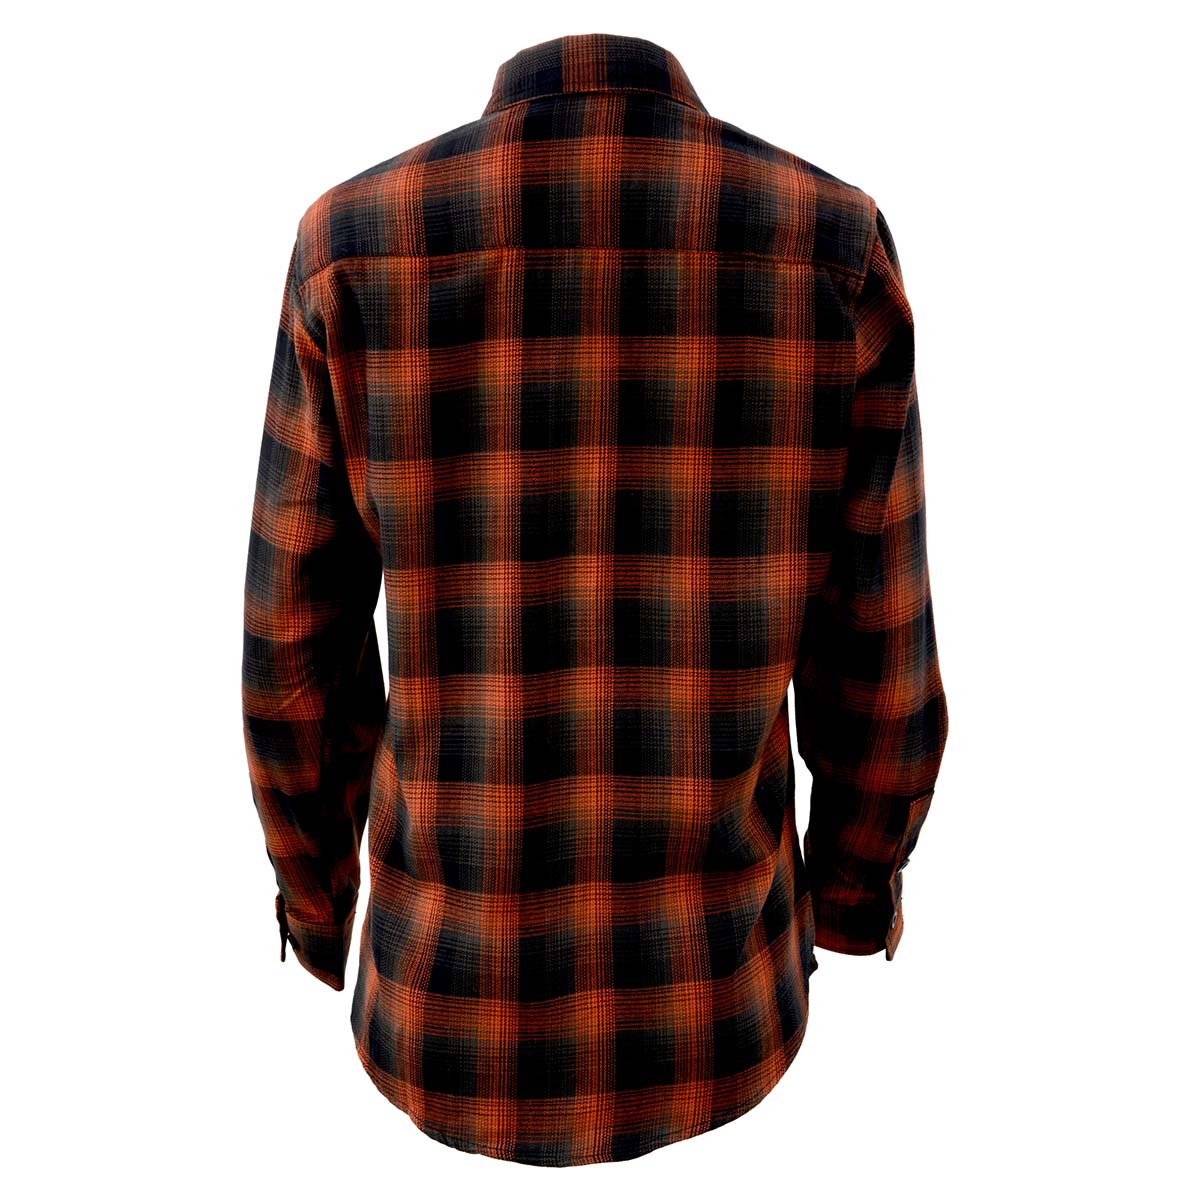 Women's Casual Red and Black Long Sleeve Cotton Casual Flannel Shirt